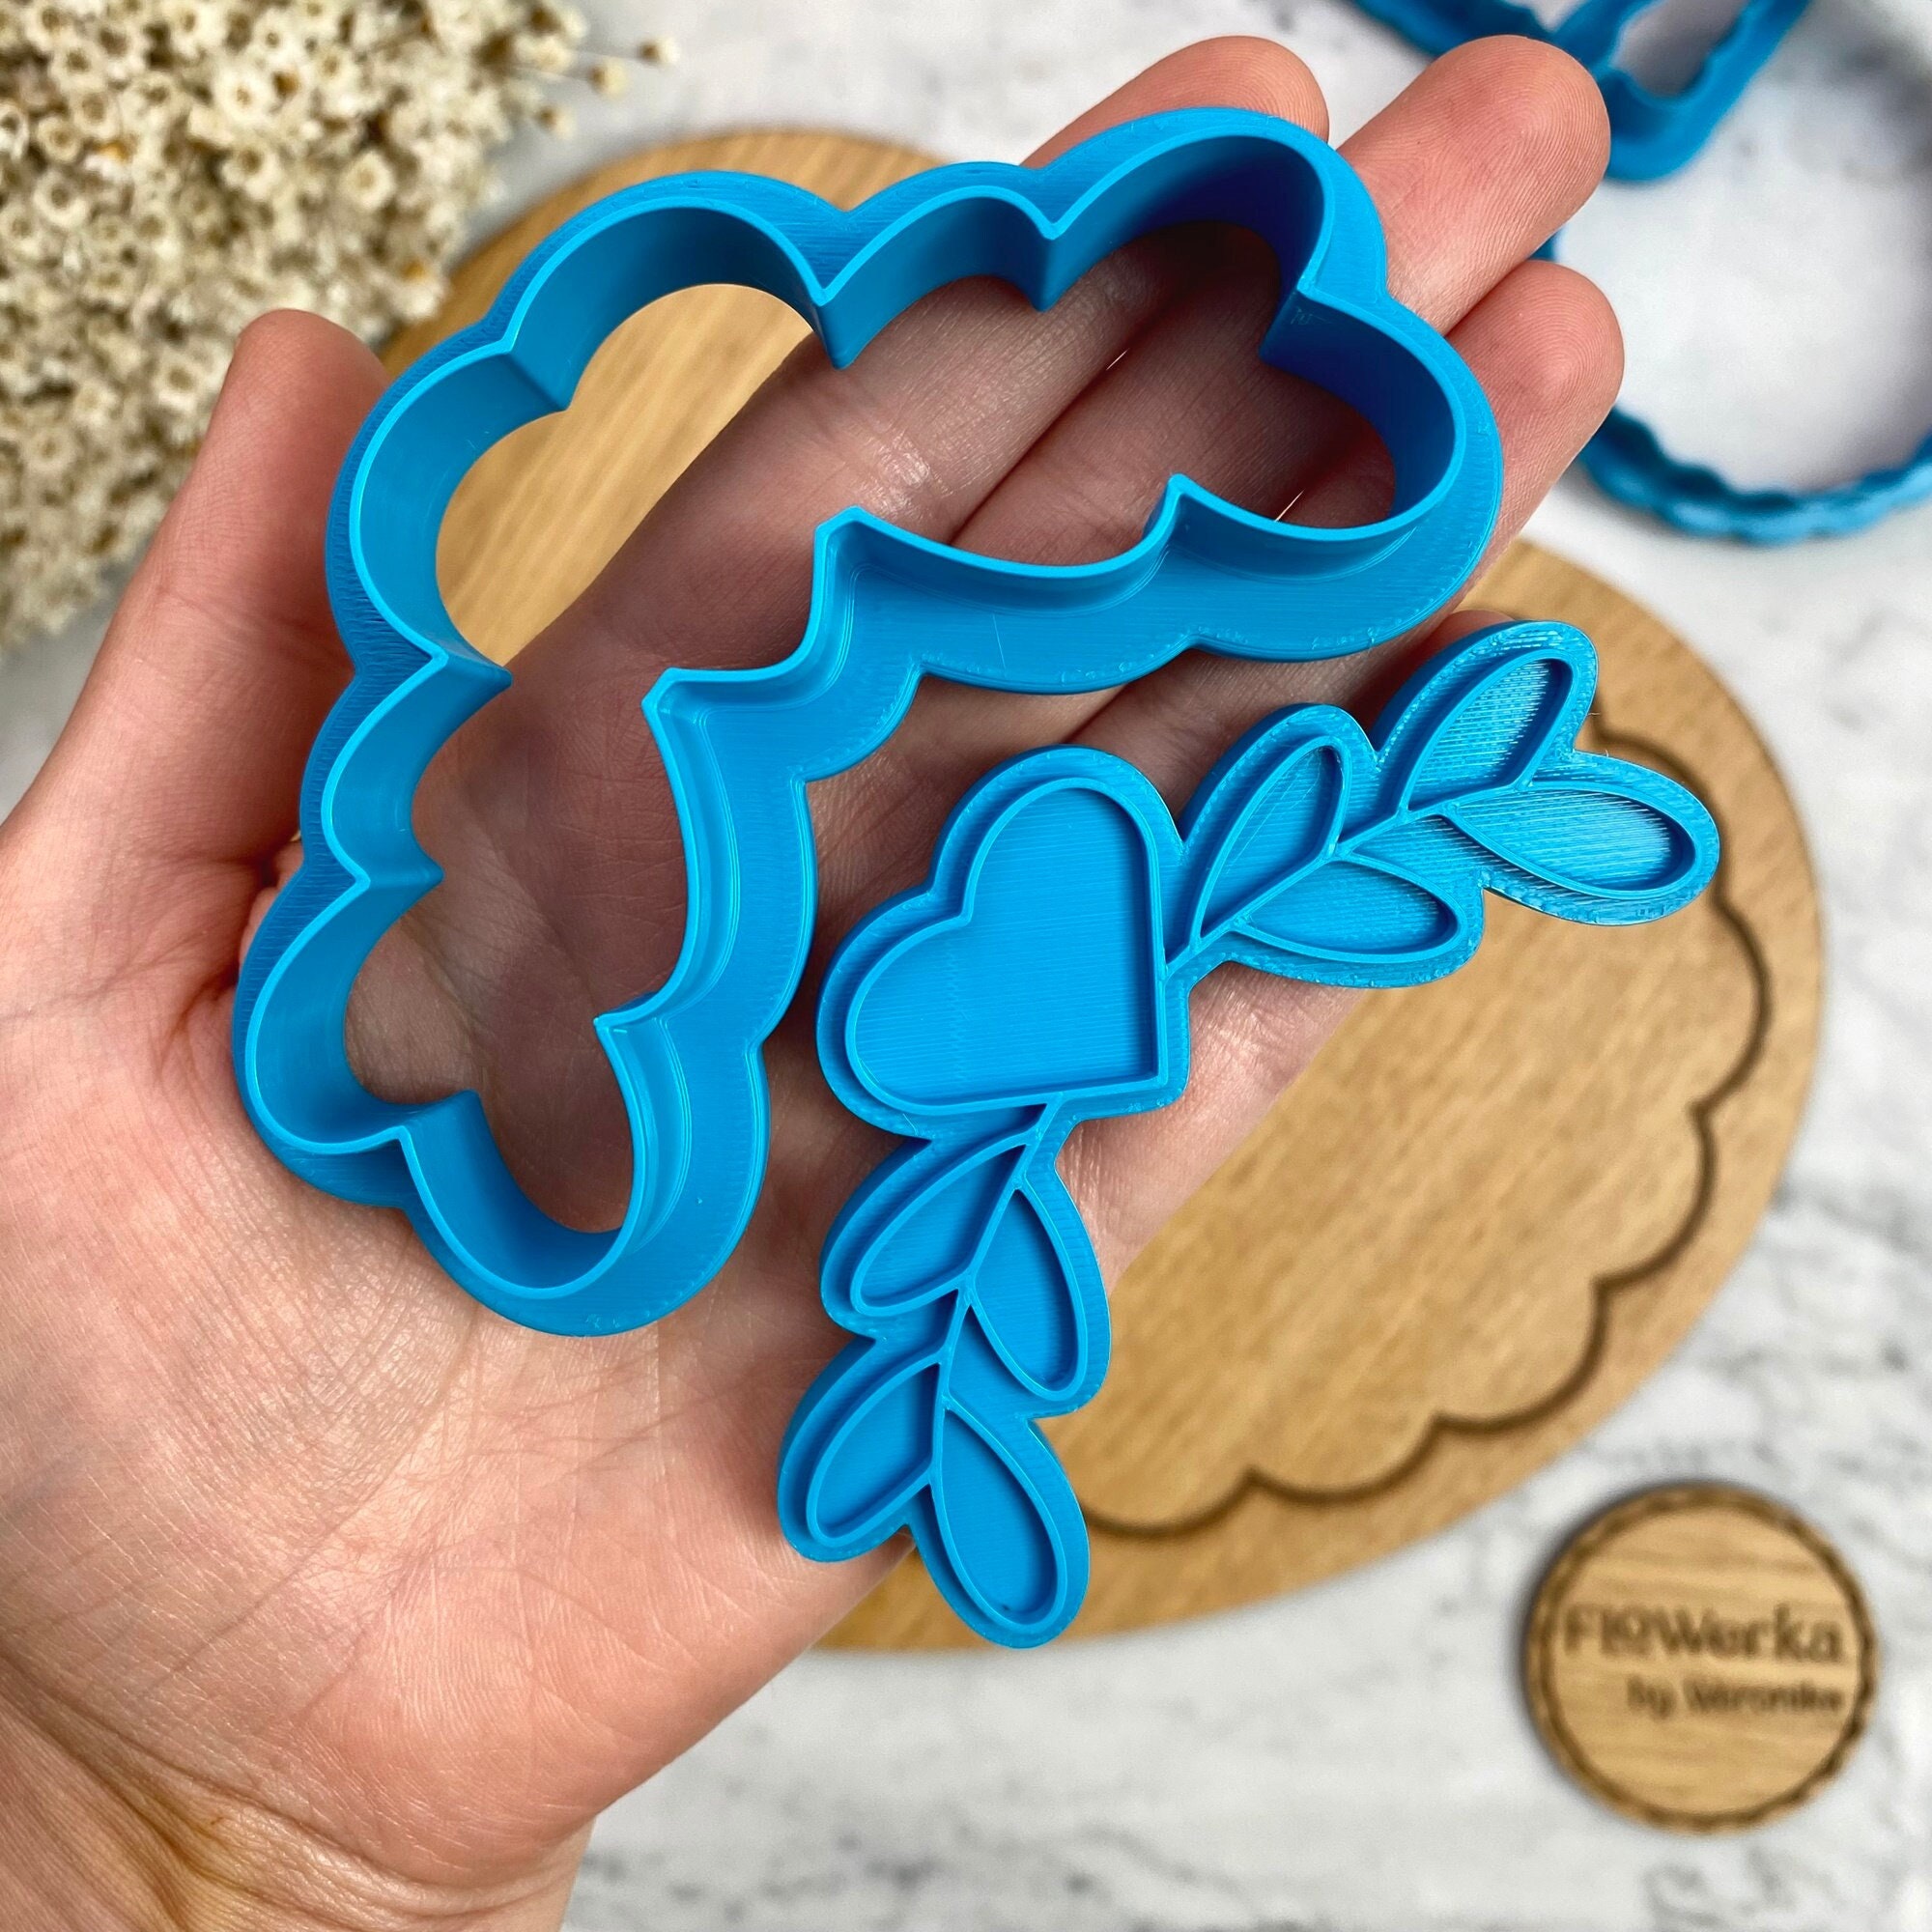 Rose Heart Silicone Cookie Mold – Artesão Cookie Molds